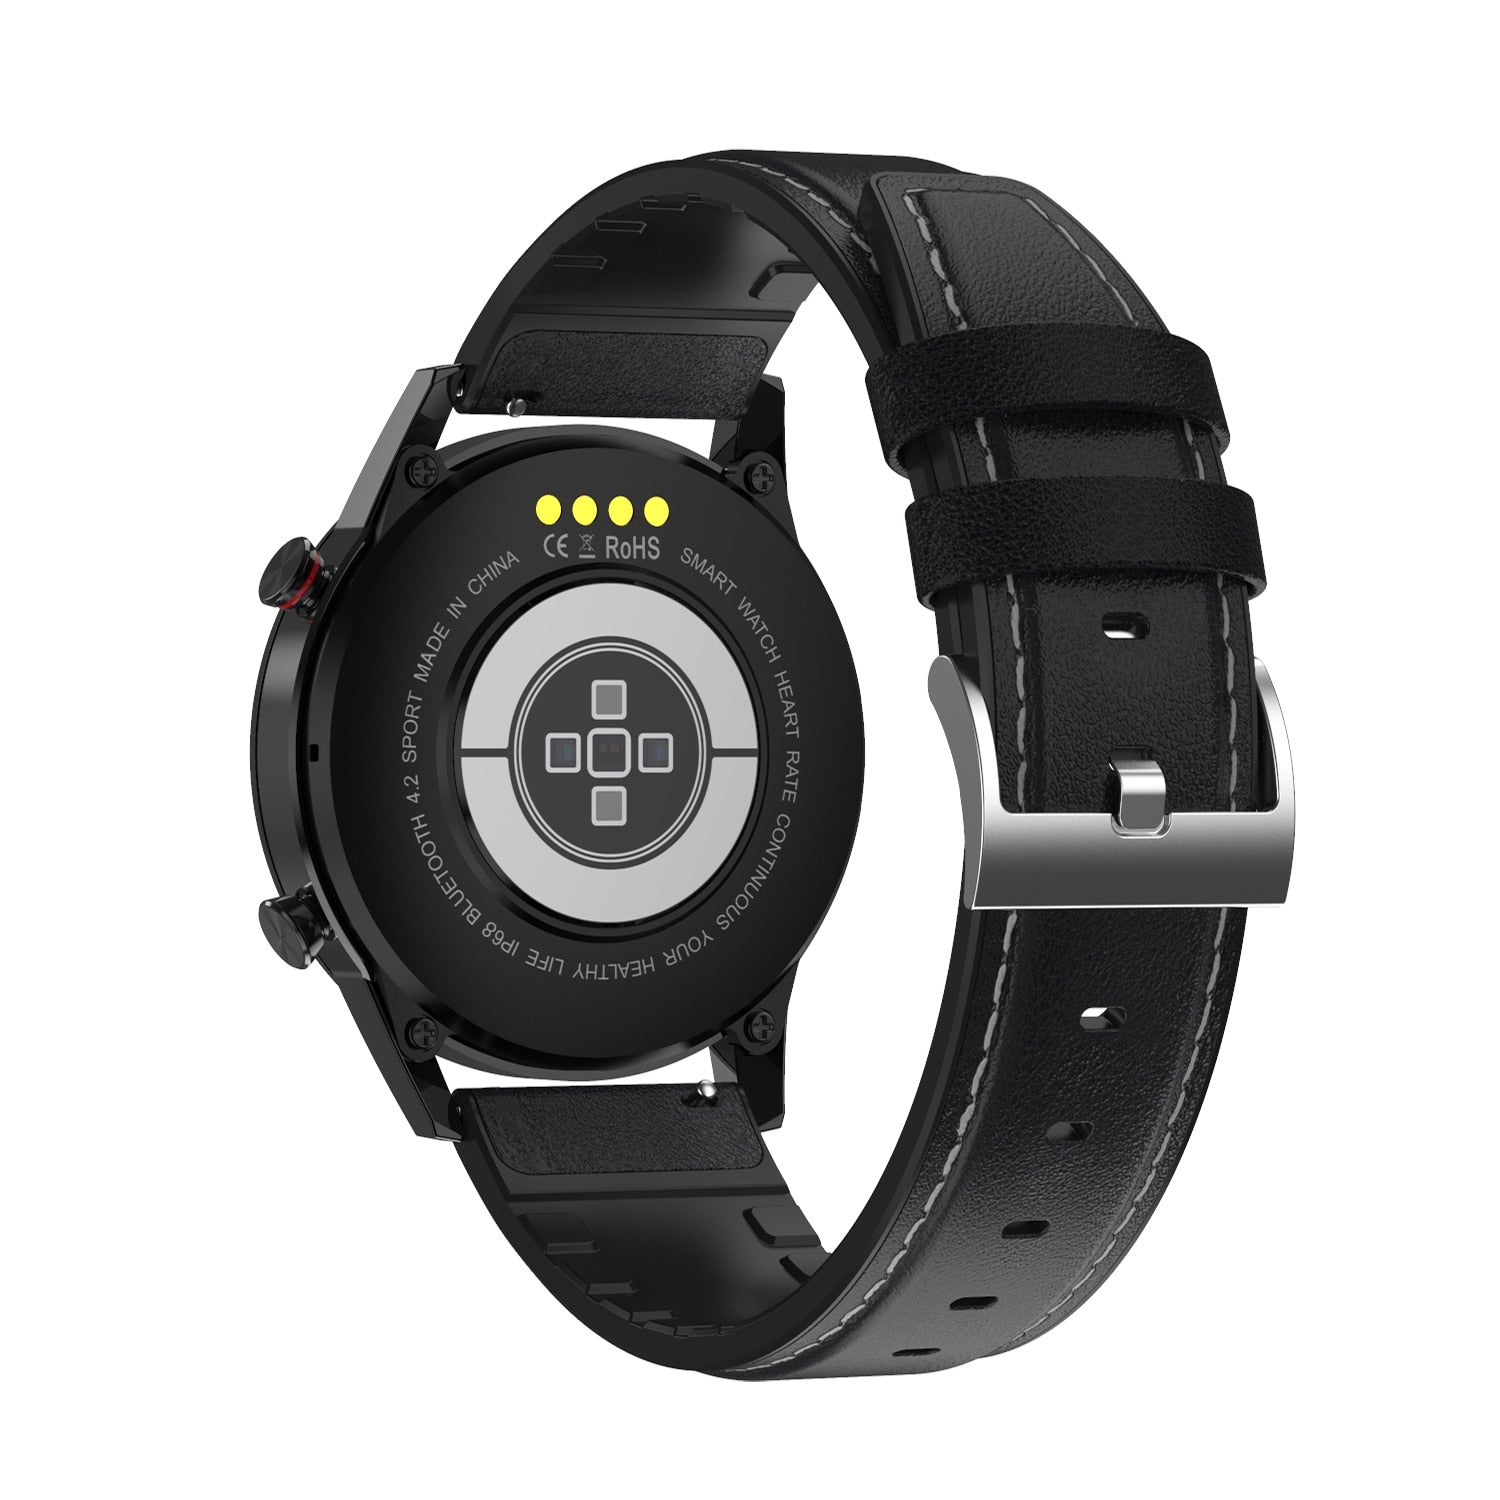 Digital Wearable Smartwatch with Health and ECG monitoring